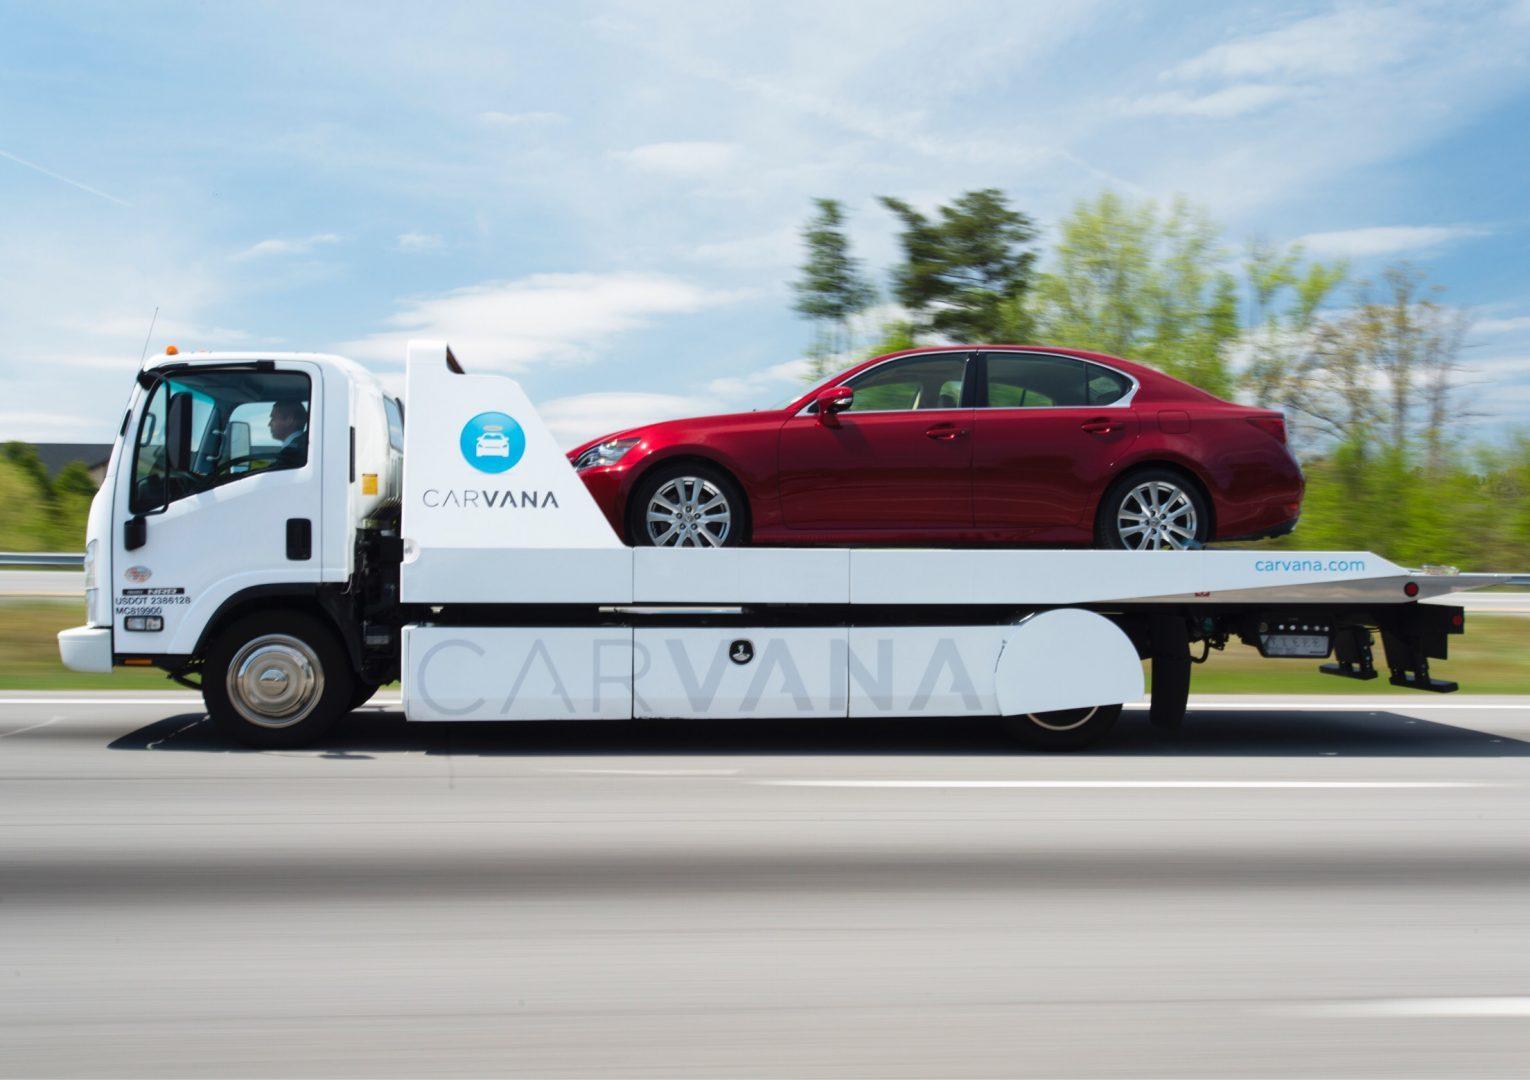 Carvana+offers+online+car+buying+options+and+next-day+delivery+for+its+shoppers.+%28Courtesy+of+Carvana%29